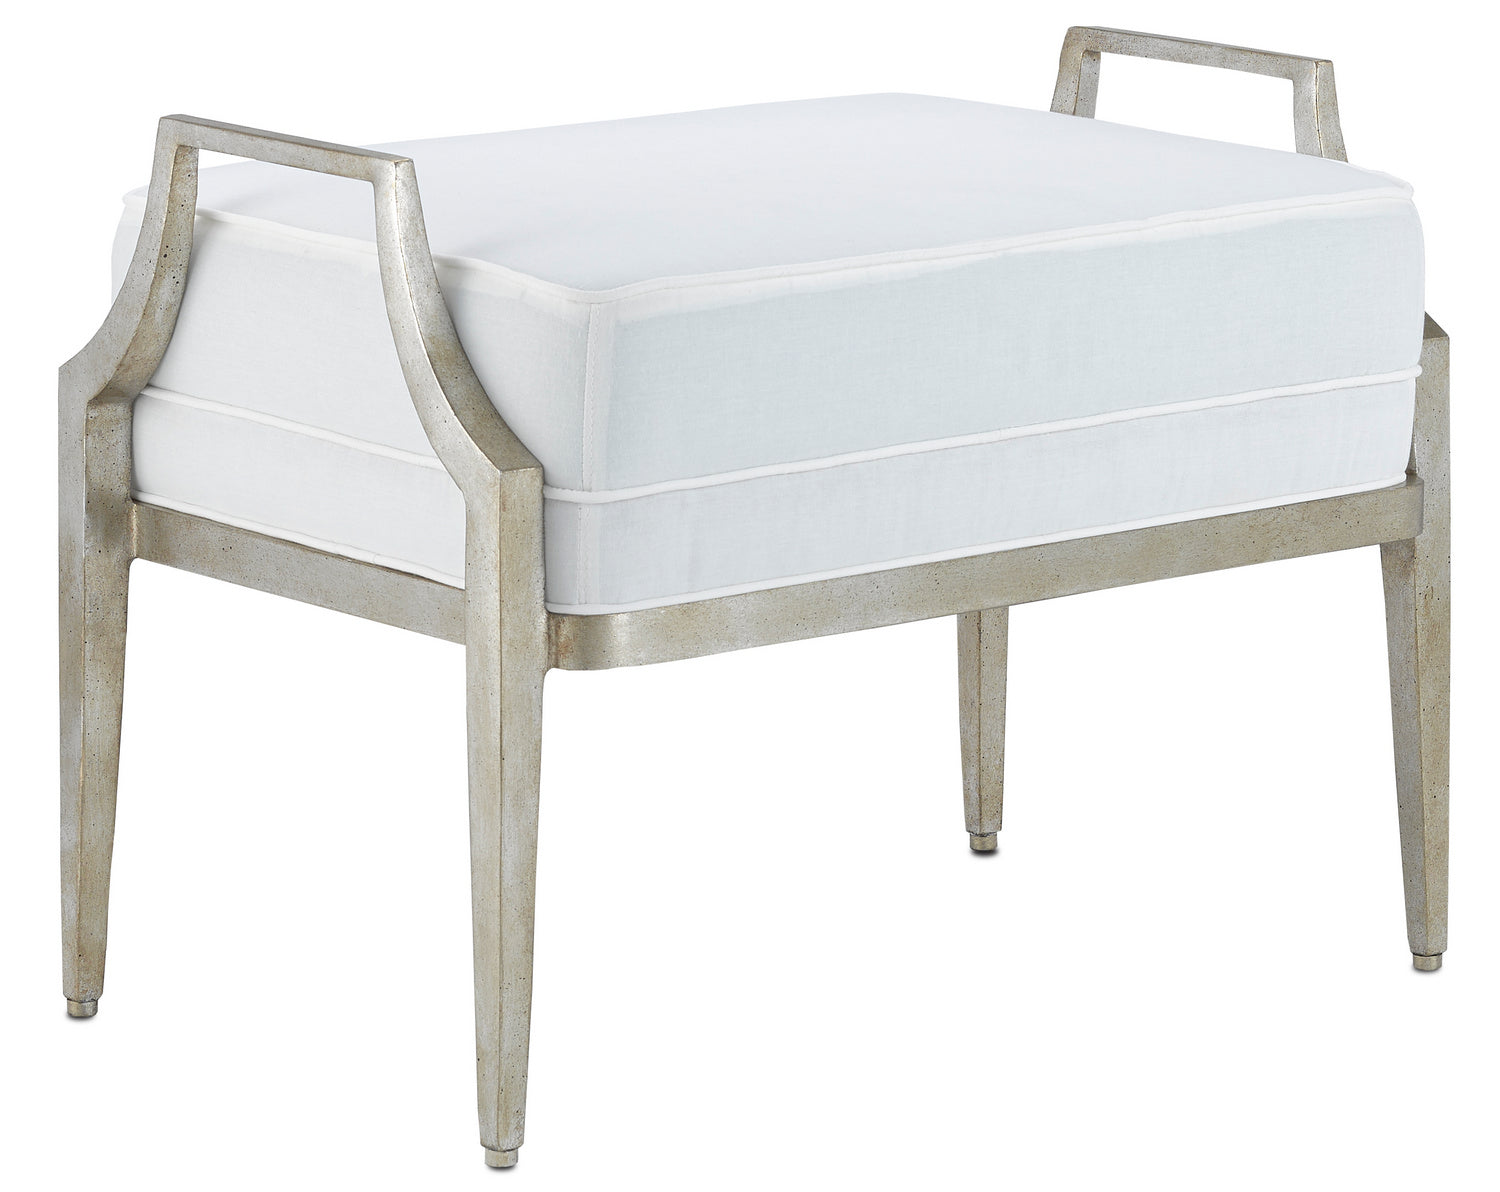 Ottoman from the Torrey collection in Silver Granello finish